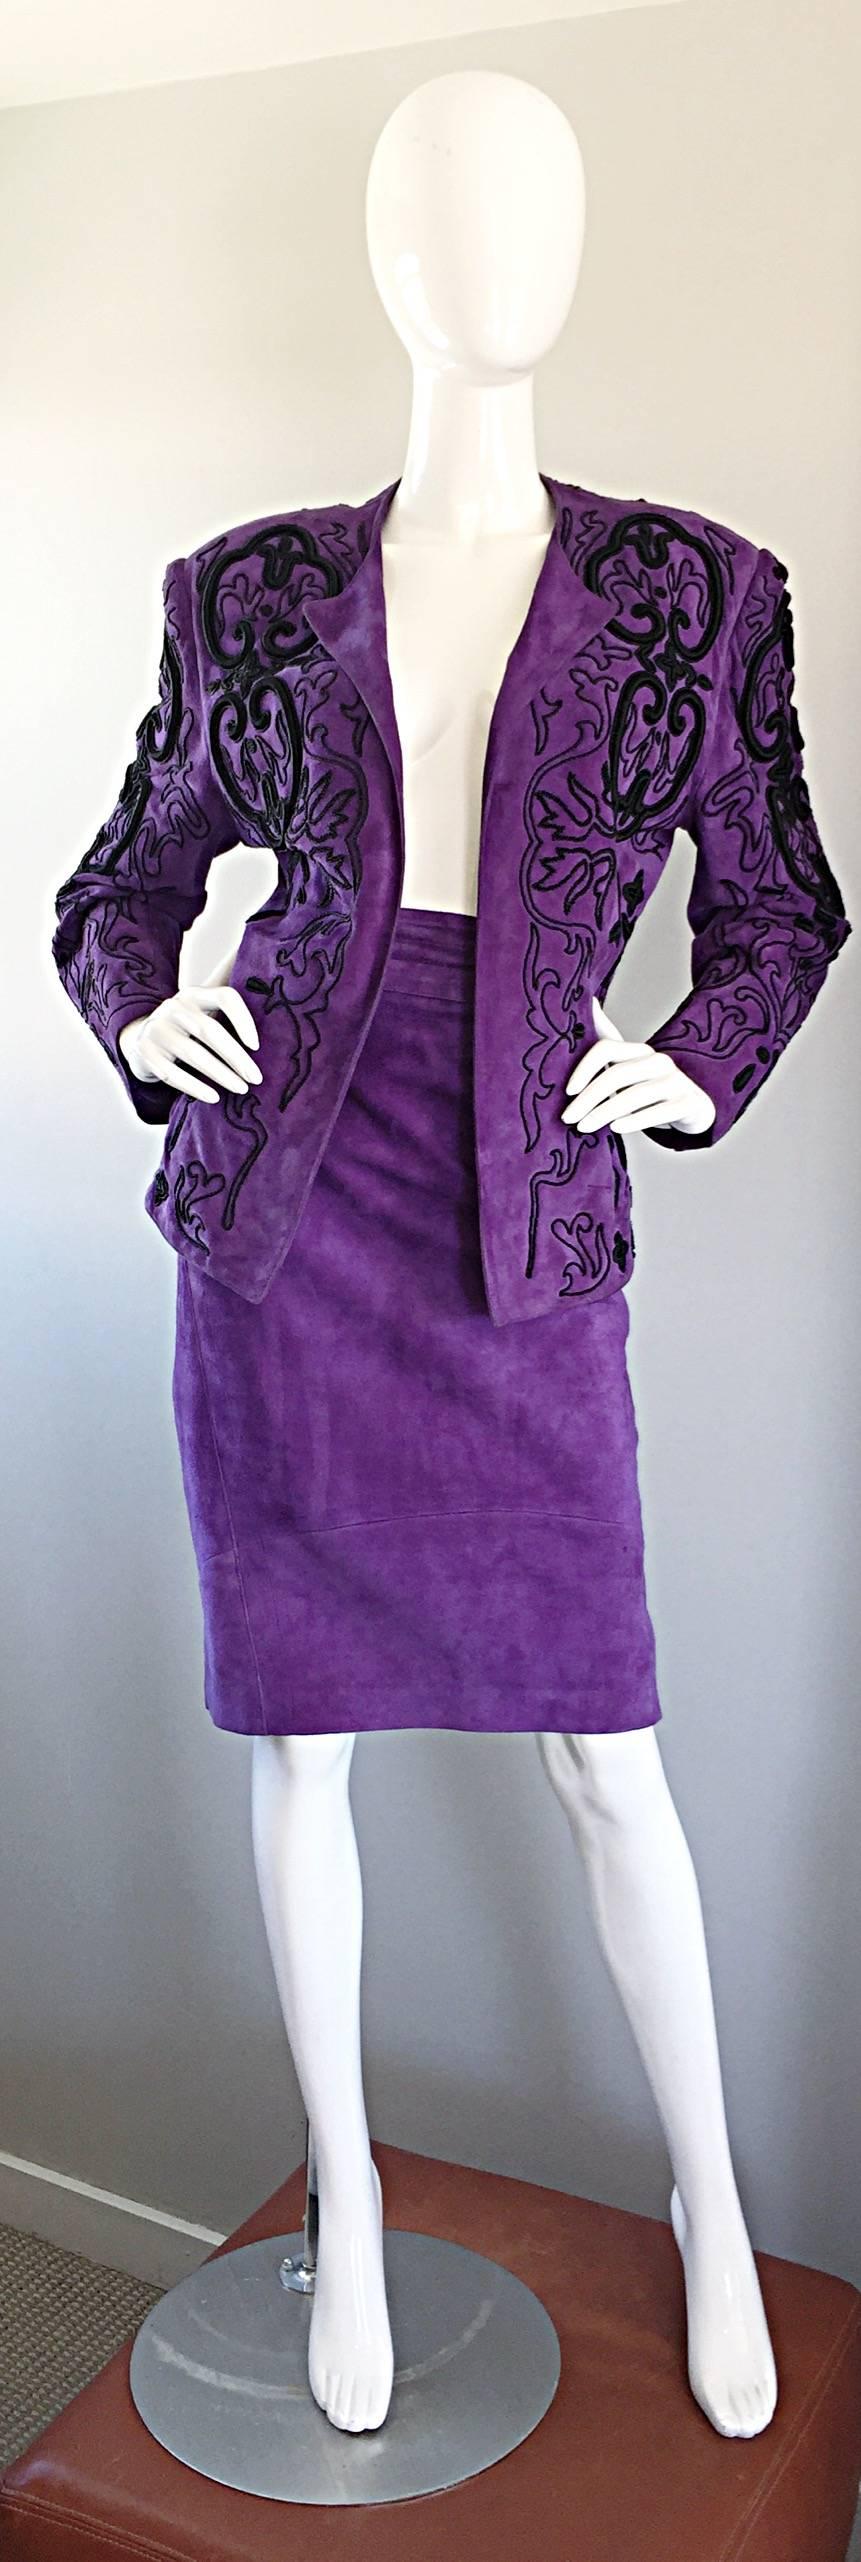 Extraordinary vintage custom made haute couture JEAN CLAUDE JITROIS leather suede regal purple ensemble from the leather genius. My client, who is the original customer, commissioned Jitrois to make this ensemble for her, and retailed for $7,000 in